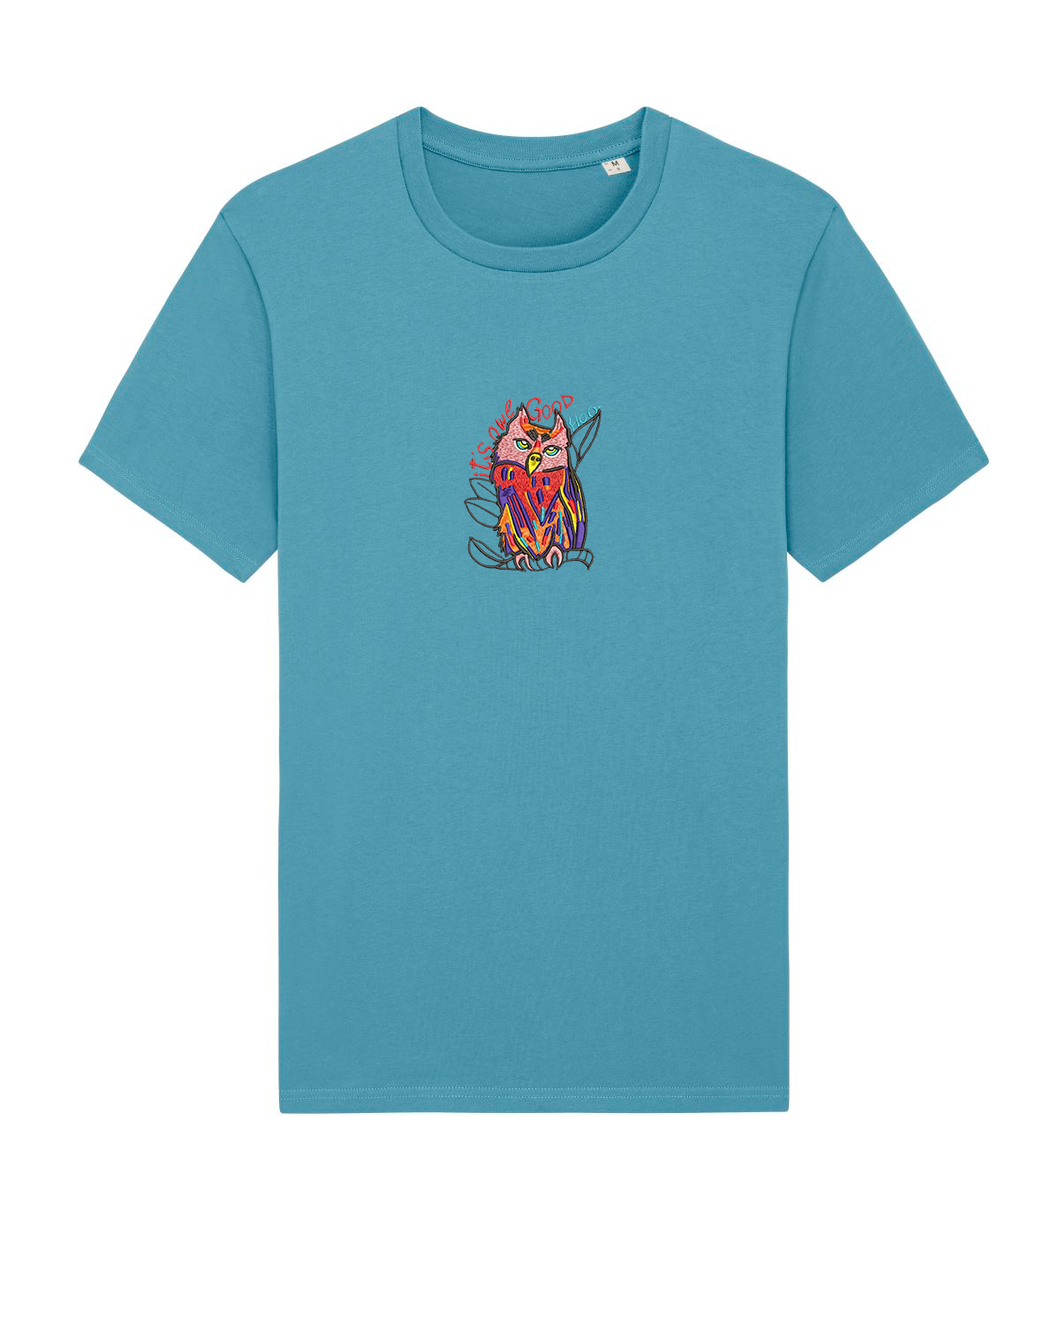 iT'S OWL GOOD 🦉 HOO. - Embroidered UNISEX T-shirt